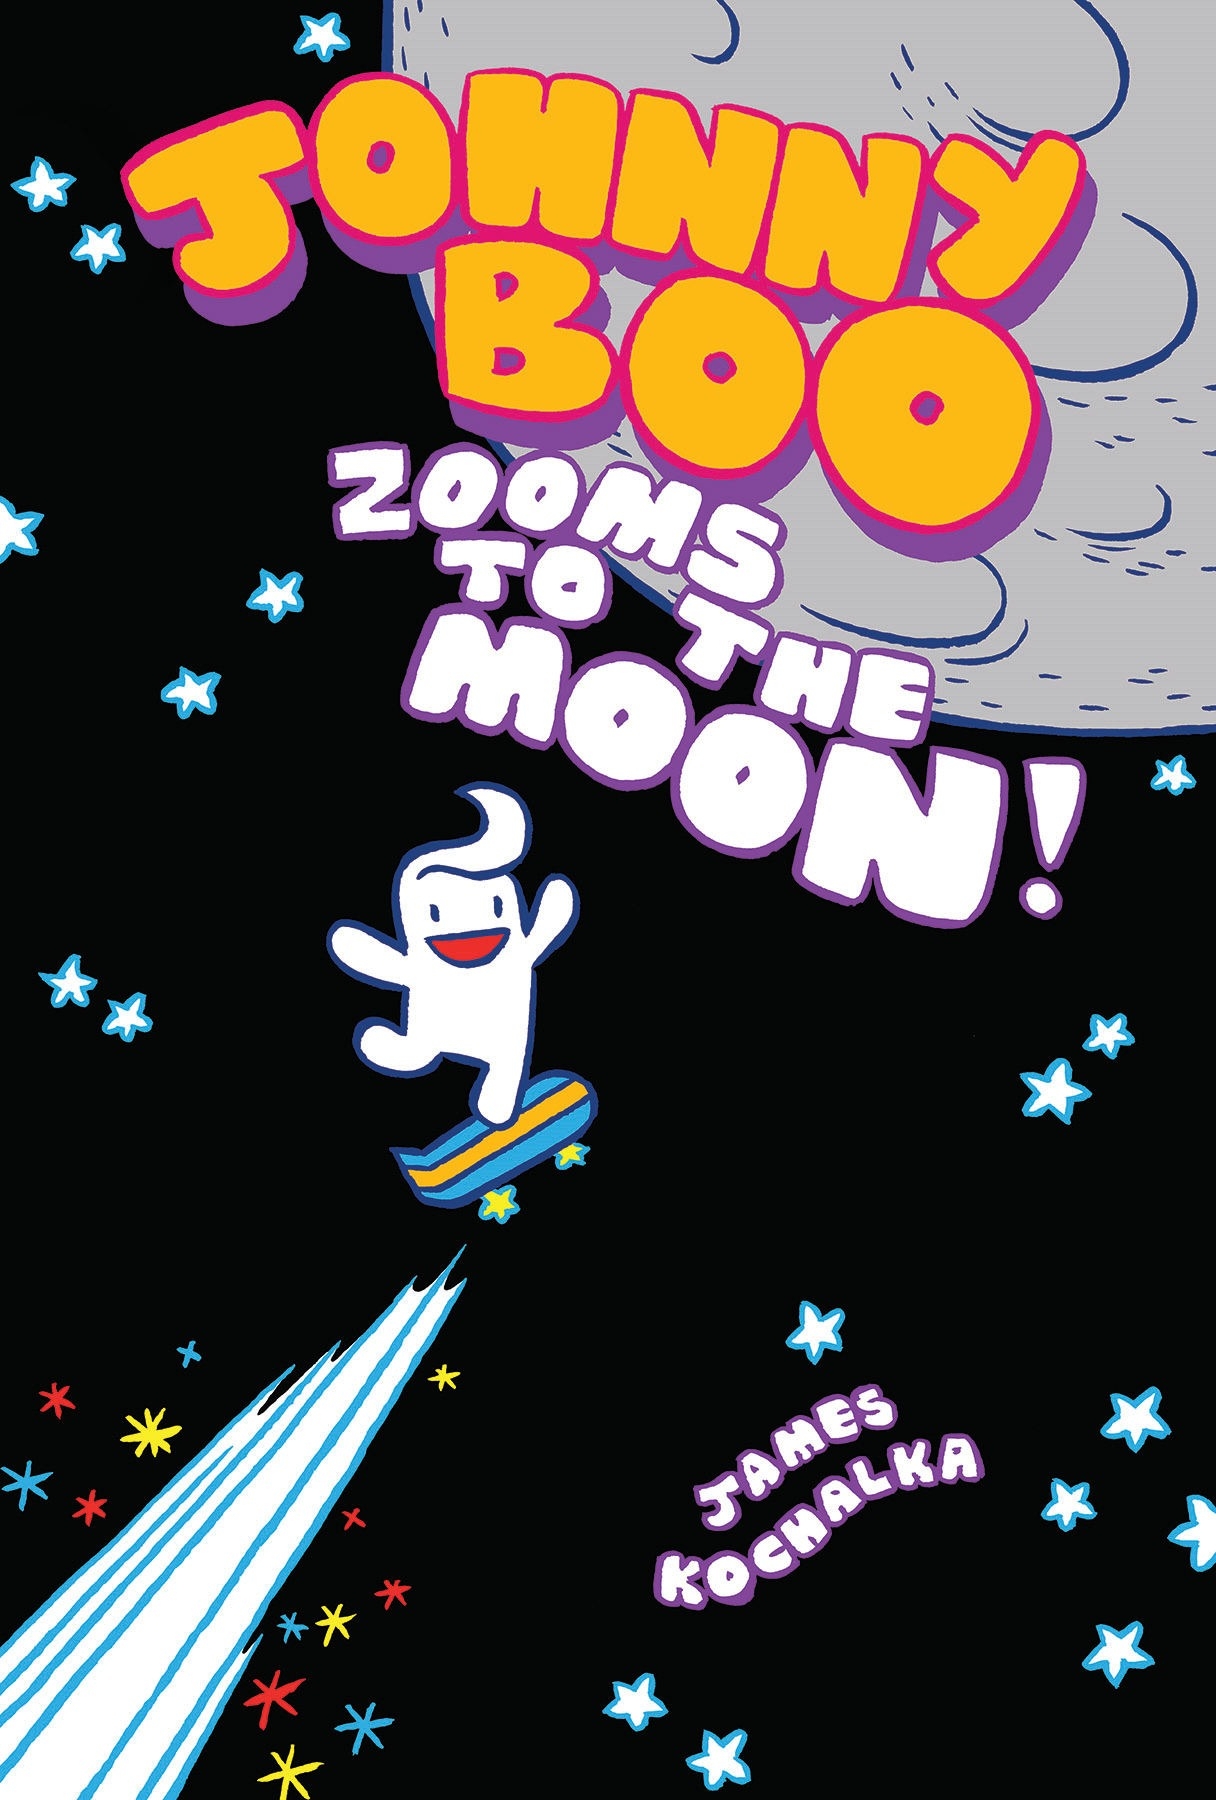 Johnny Boo Hardcover Volume 6 Zooms To The Moon